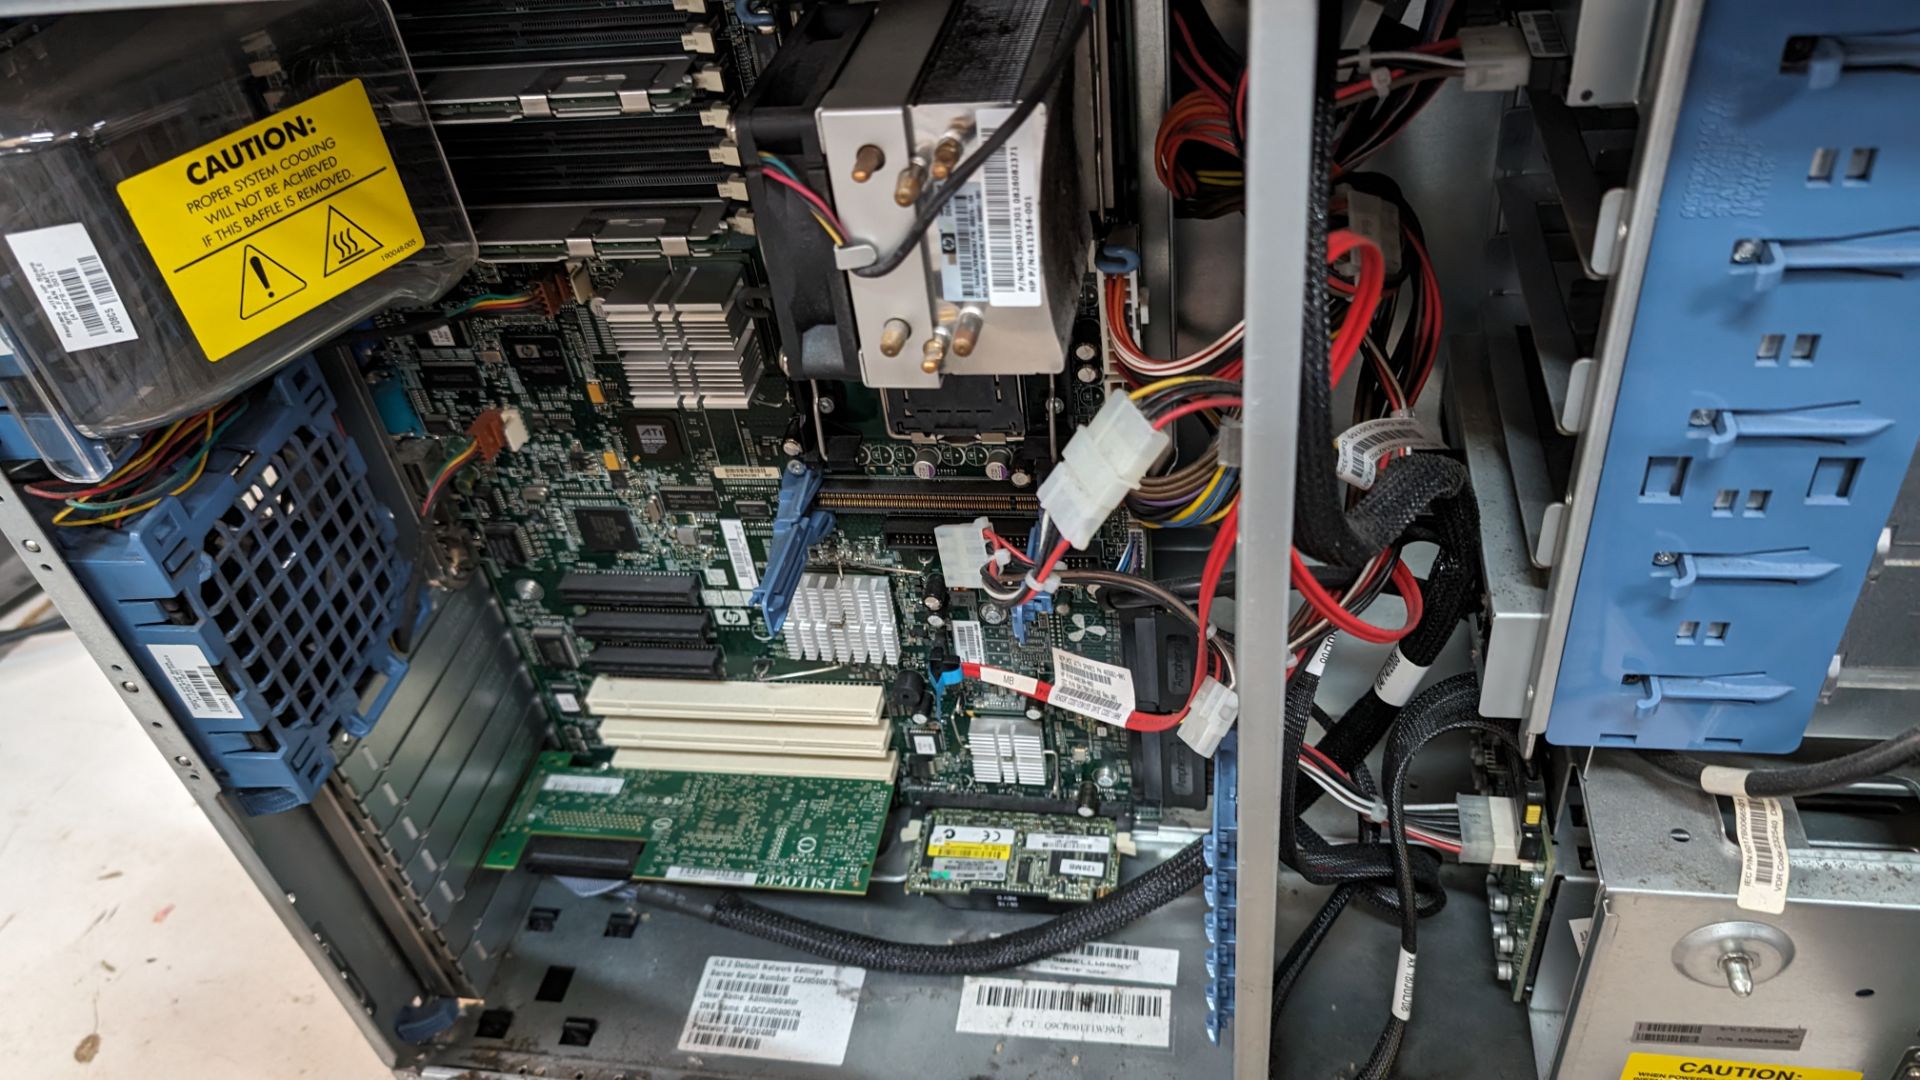 HP server incorporating 2 off hot swap drives, optical drive & HP Storageworks DAT 160 tape drive - Image 14 of 15